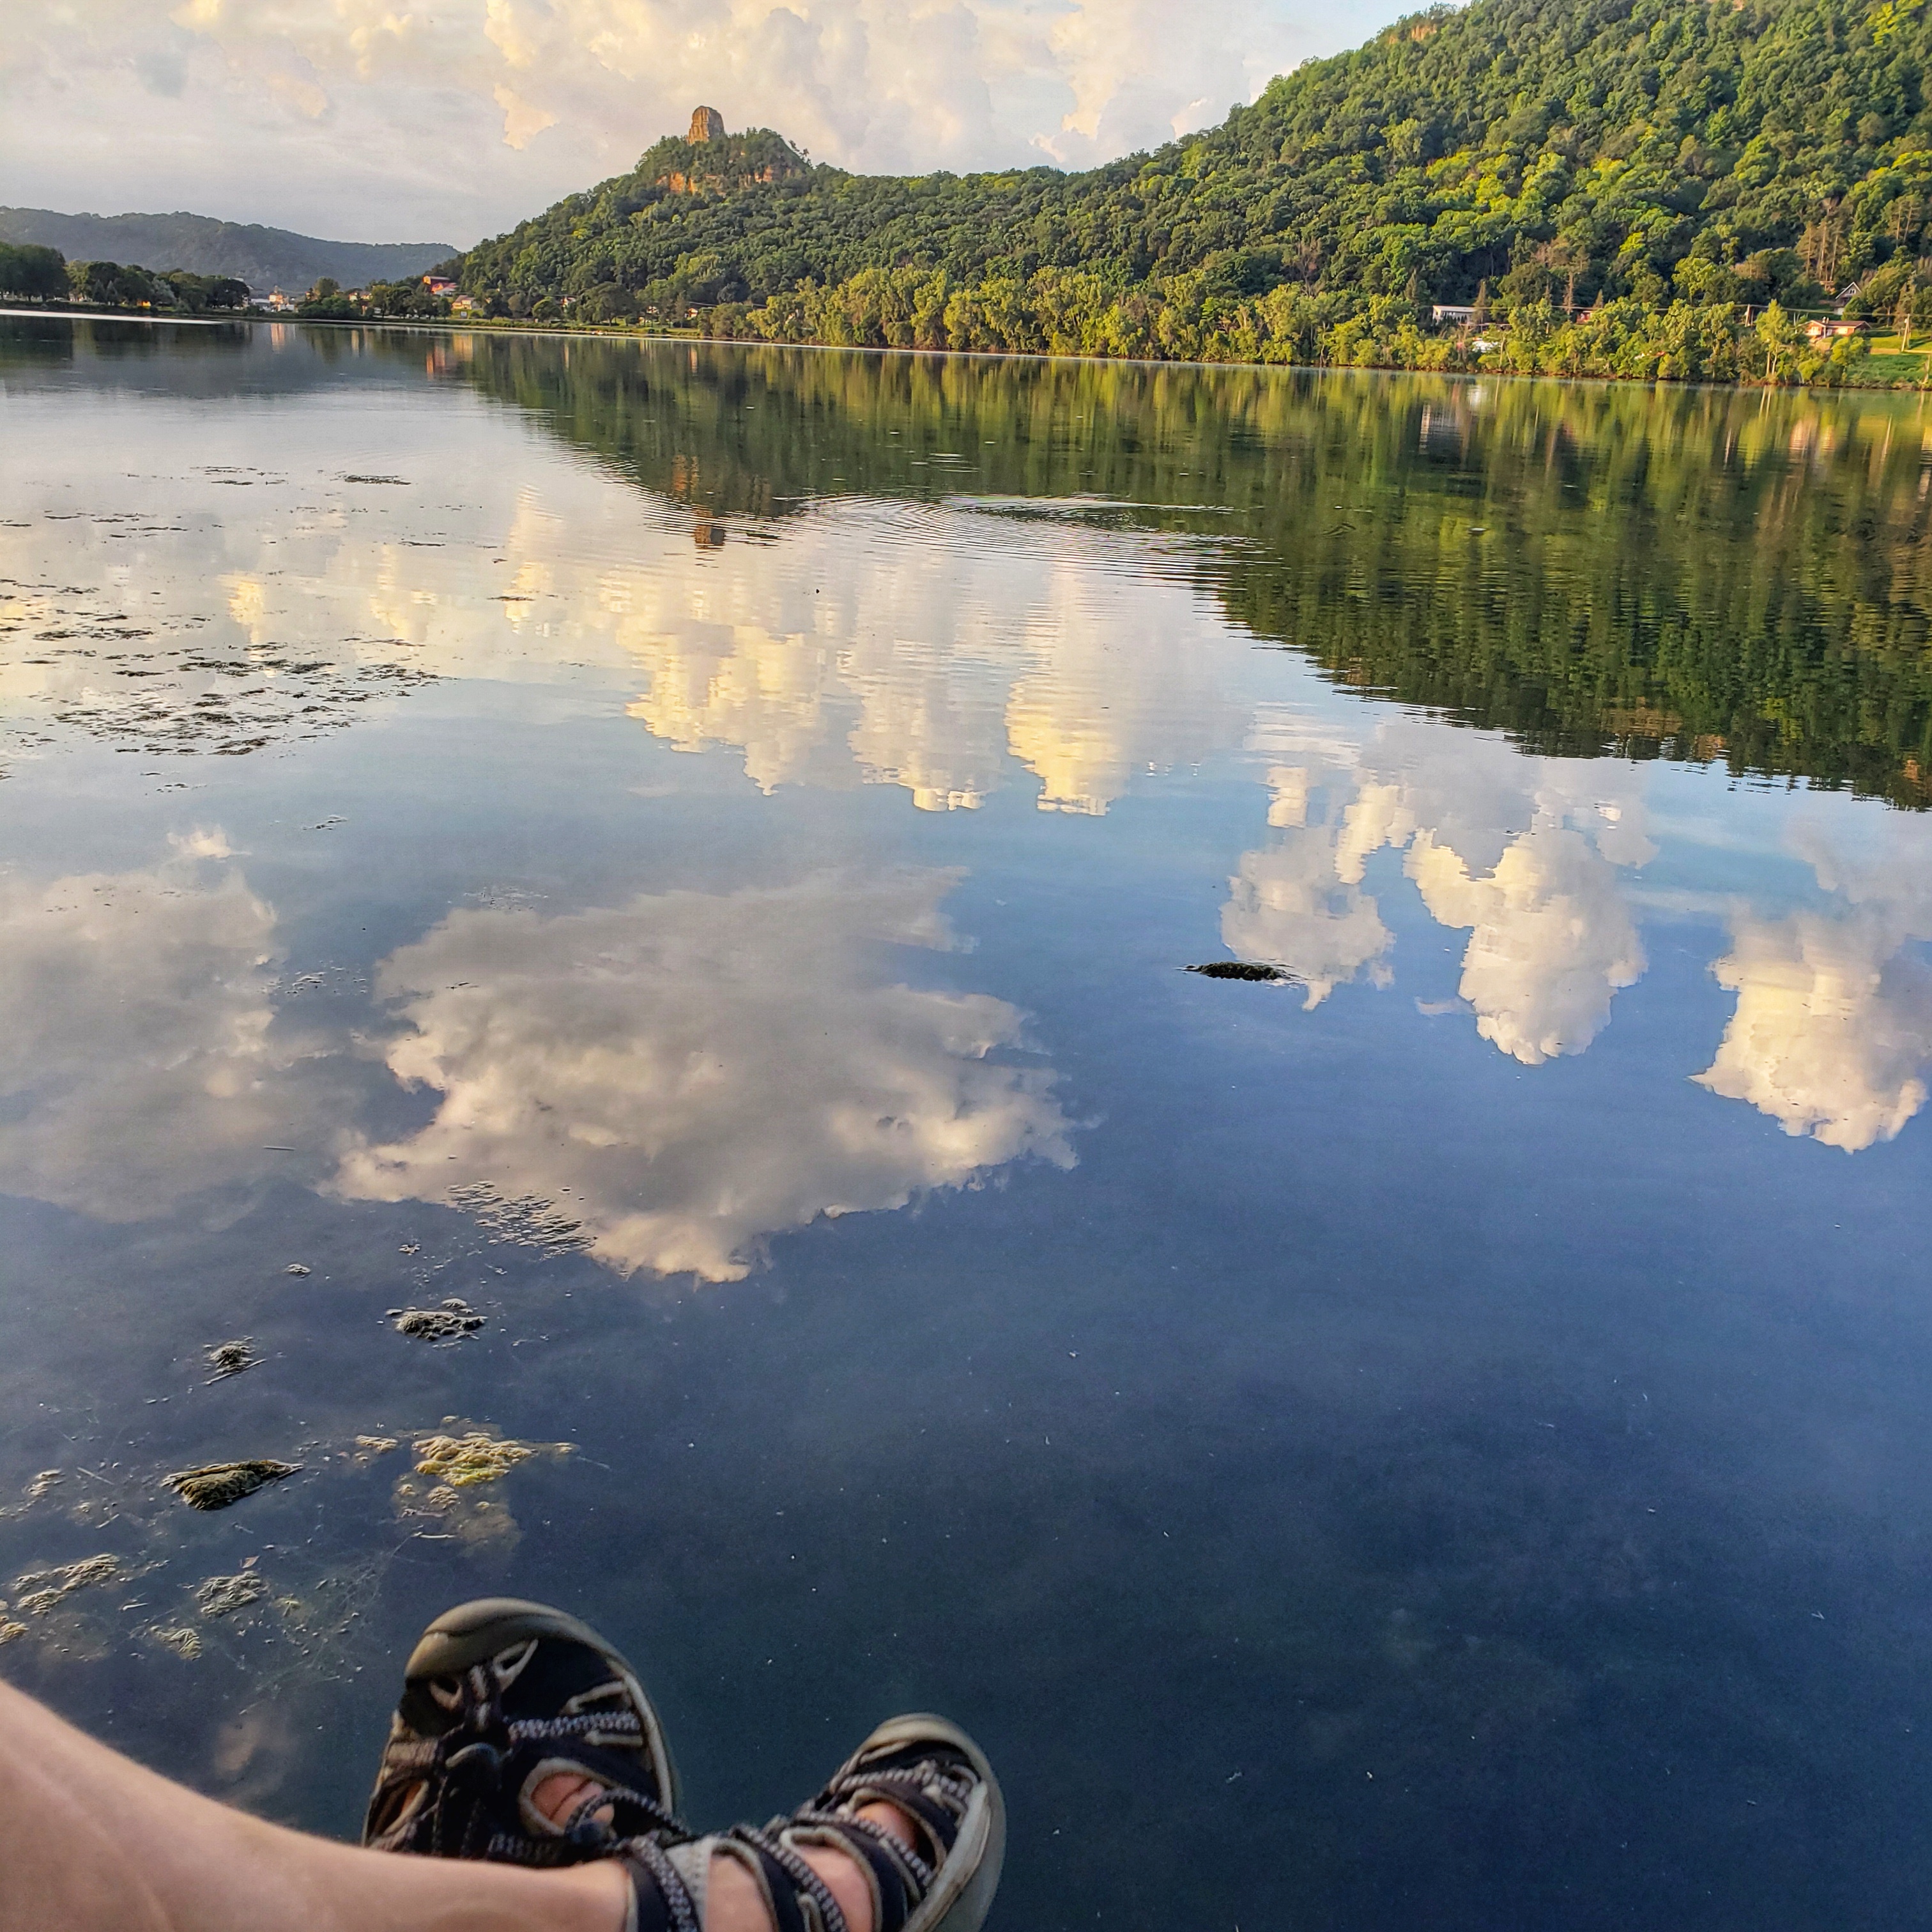 A picture from Winona, Minnesota that displays Sugar Loaf Bluff and Lake Winona. A pair of feet can be seen resting over the water.